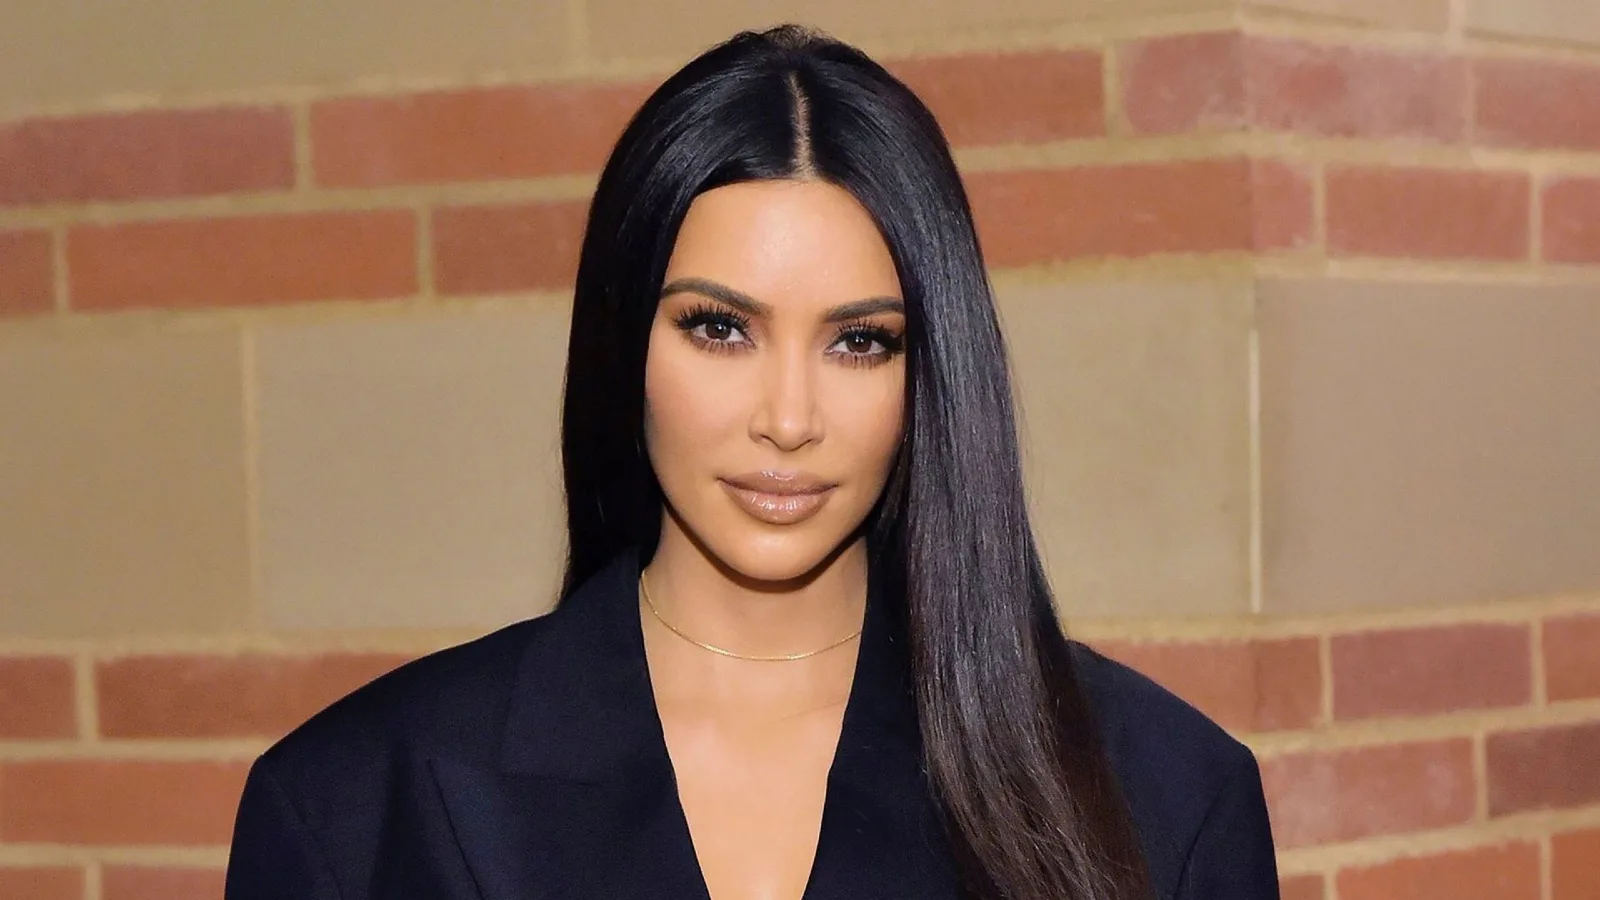 SEC fines Kim Kardashian for a whopping $1.26 Million as penalties for Unlawful Promotion of Cryptocurrency